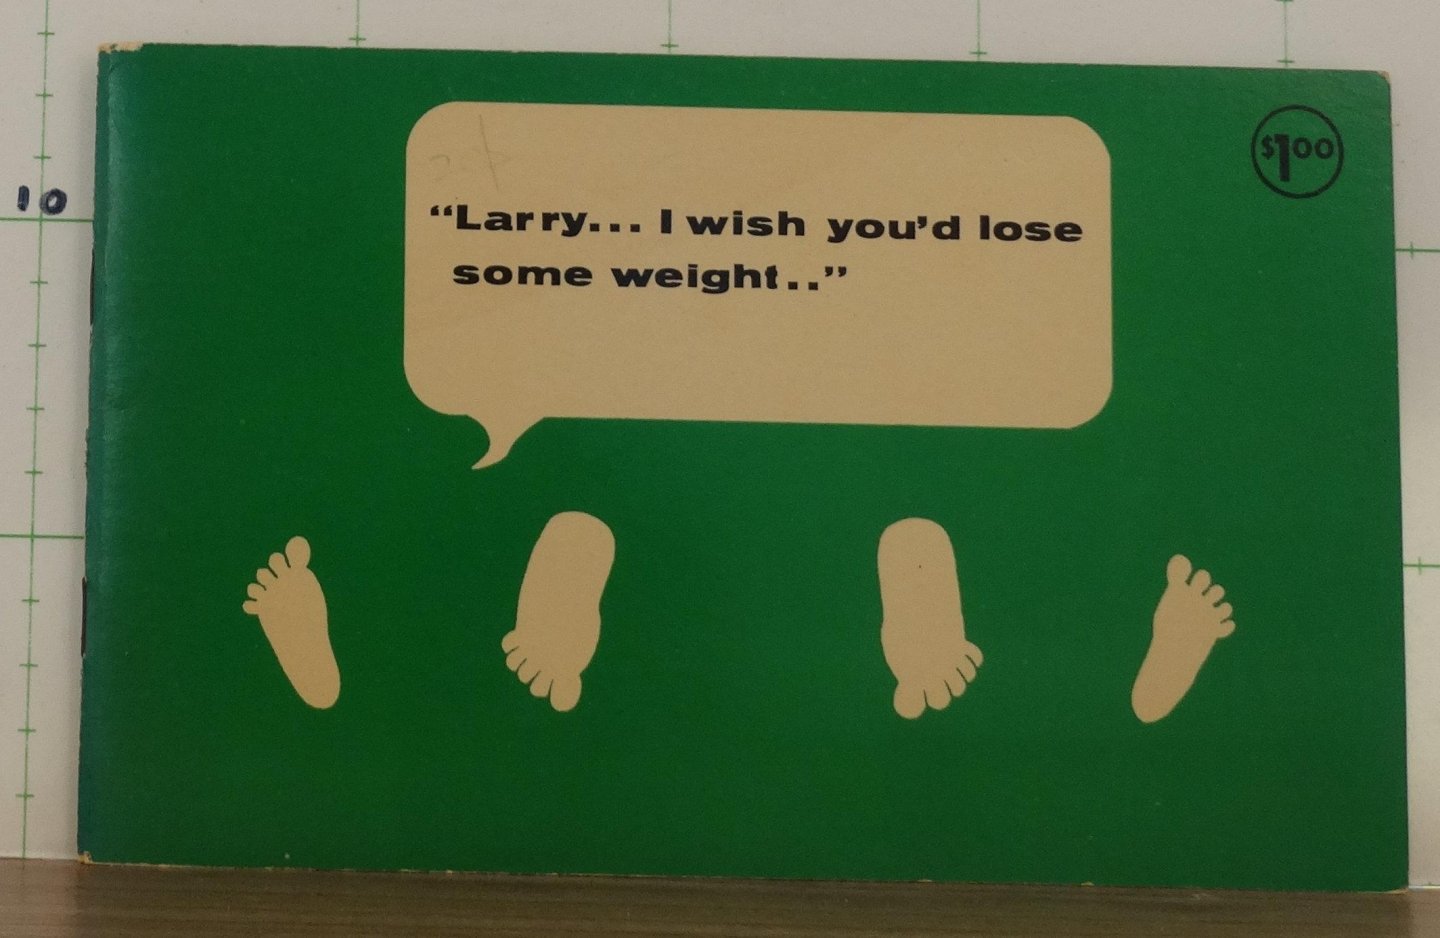 Lis, F. de - "Larry...i wish you'd lose some weight..."